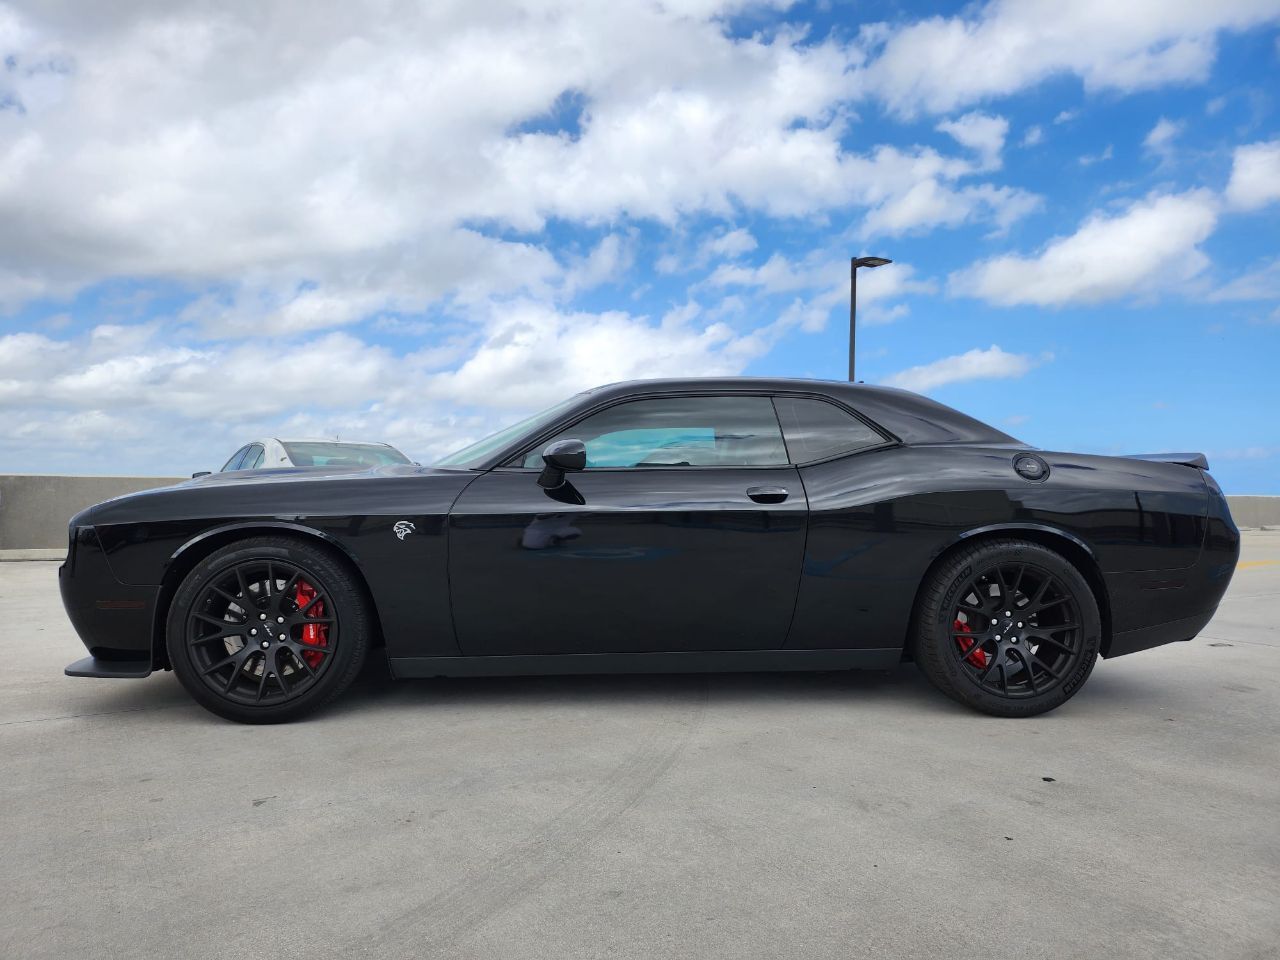 2015 Dodge Challenger Coupe - $50,999